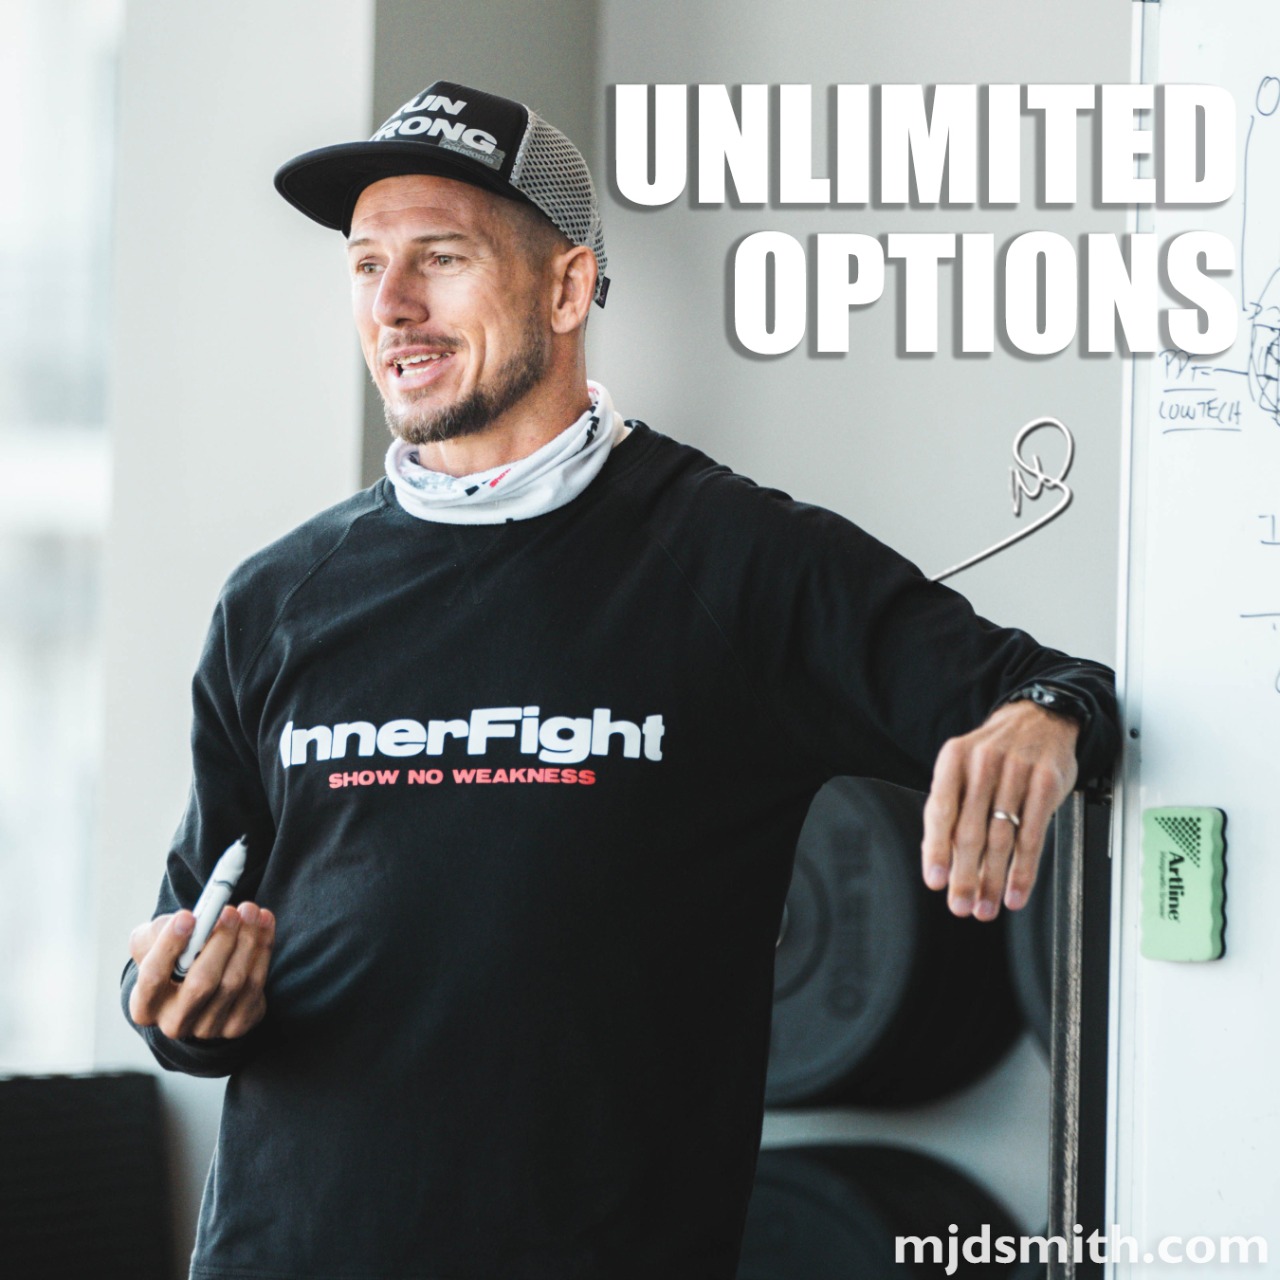 Unlimited options